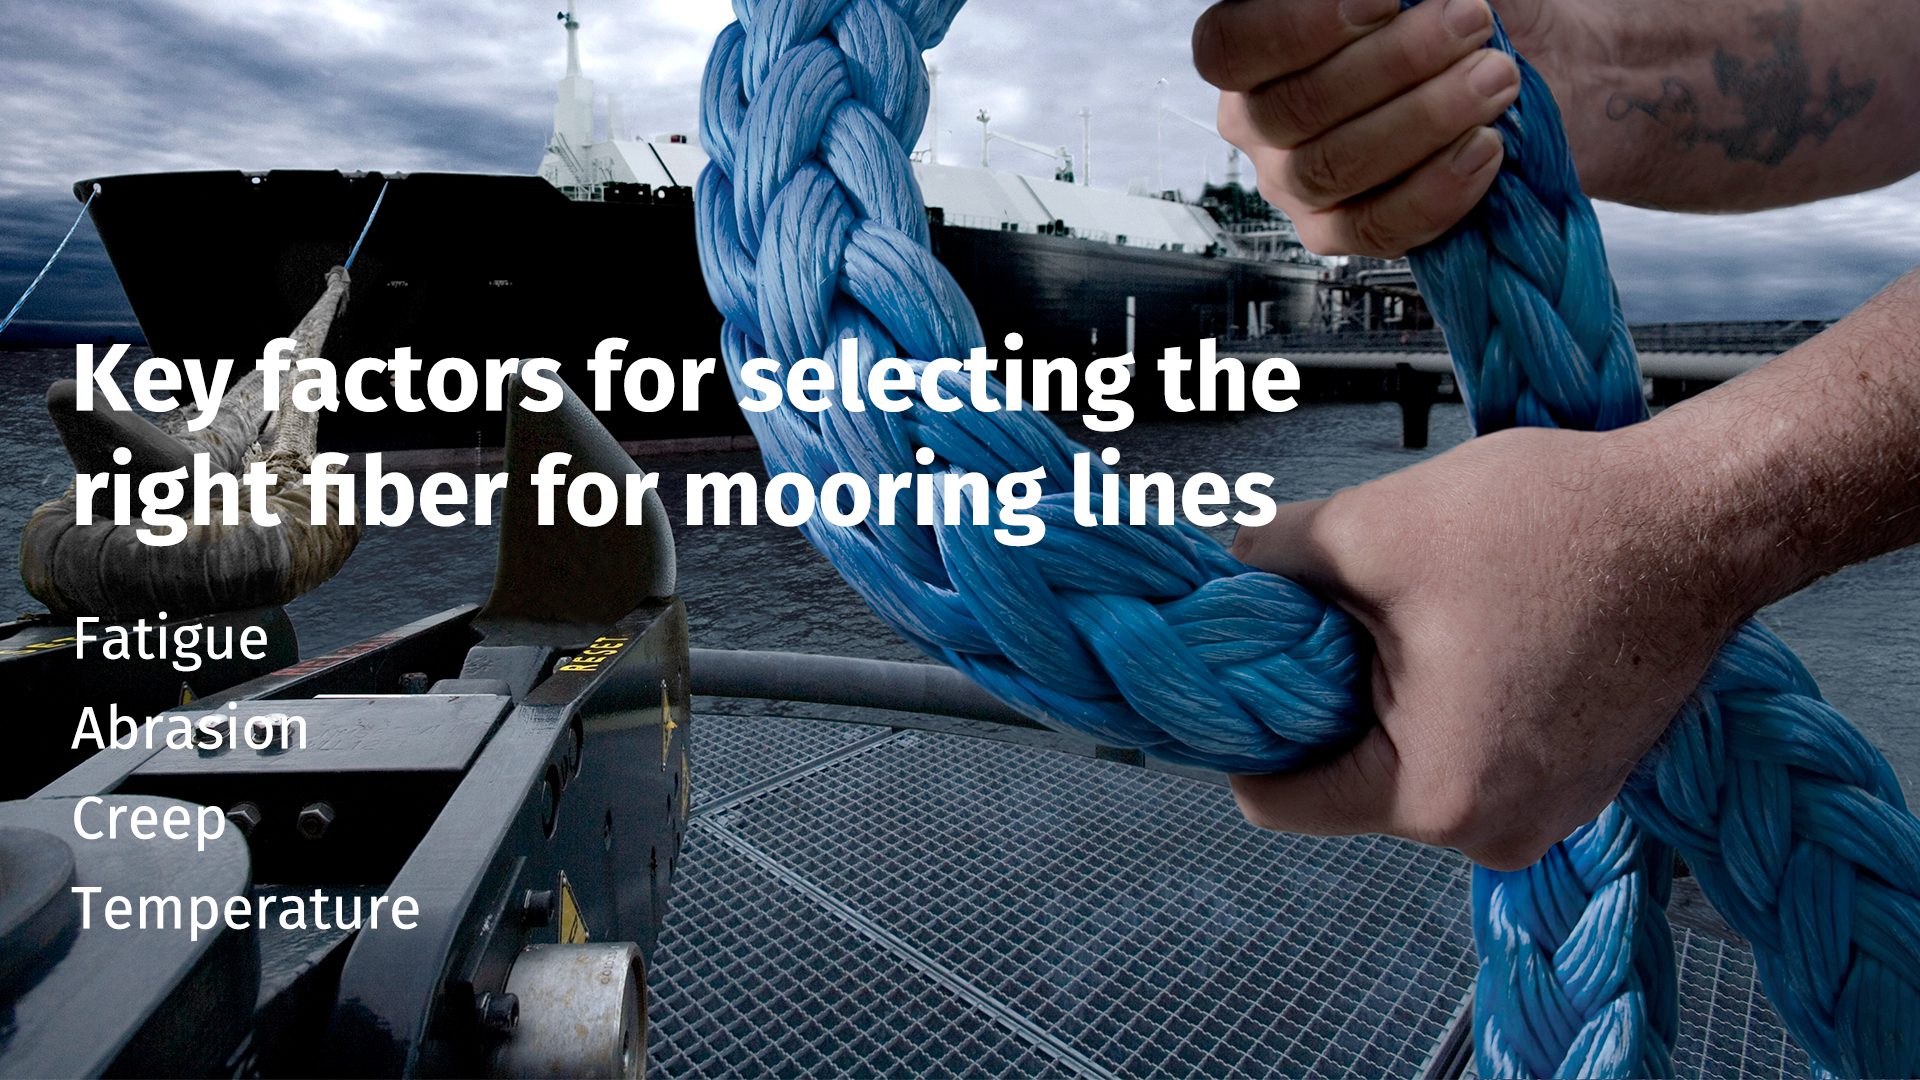 Abrasion Resistance The Second Factor For Selecting The Right Mooring Lines For Your Vessel